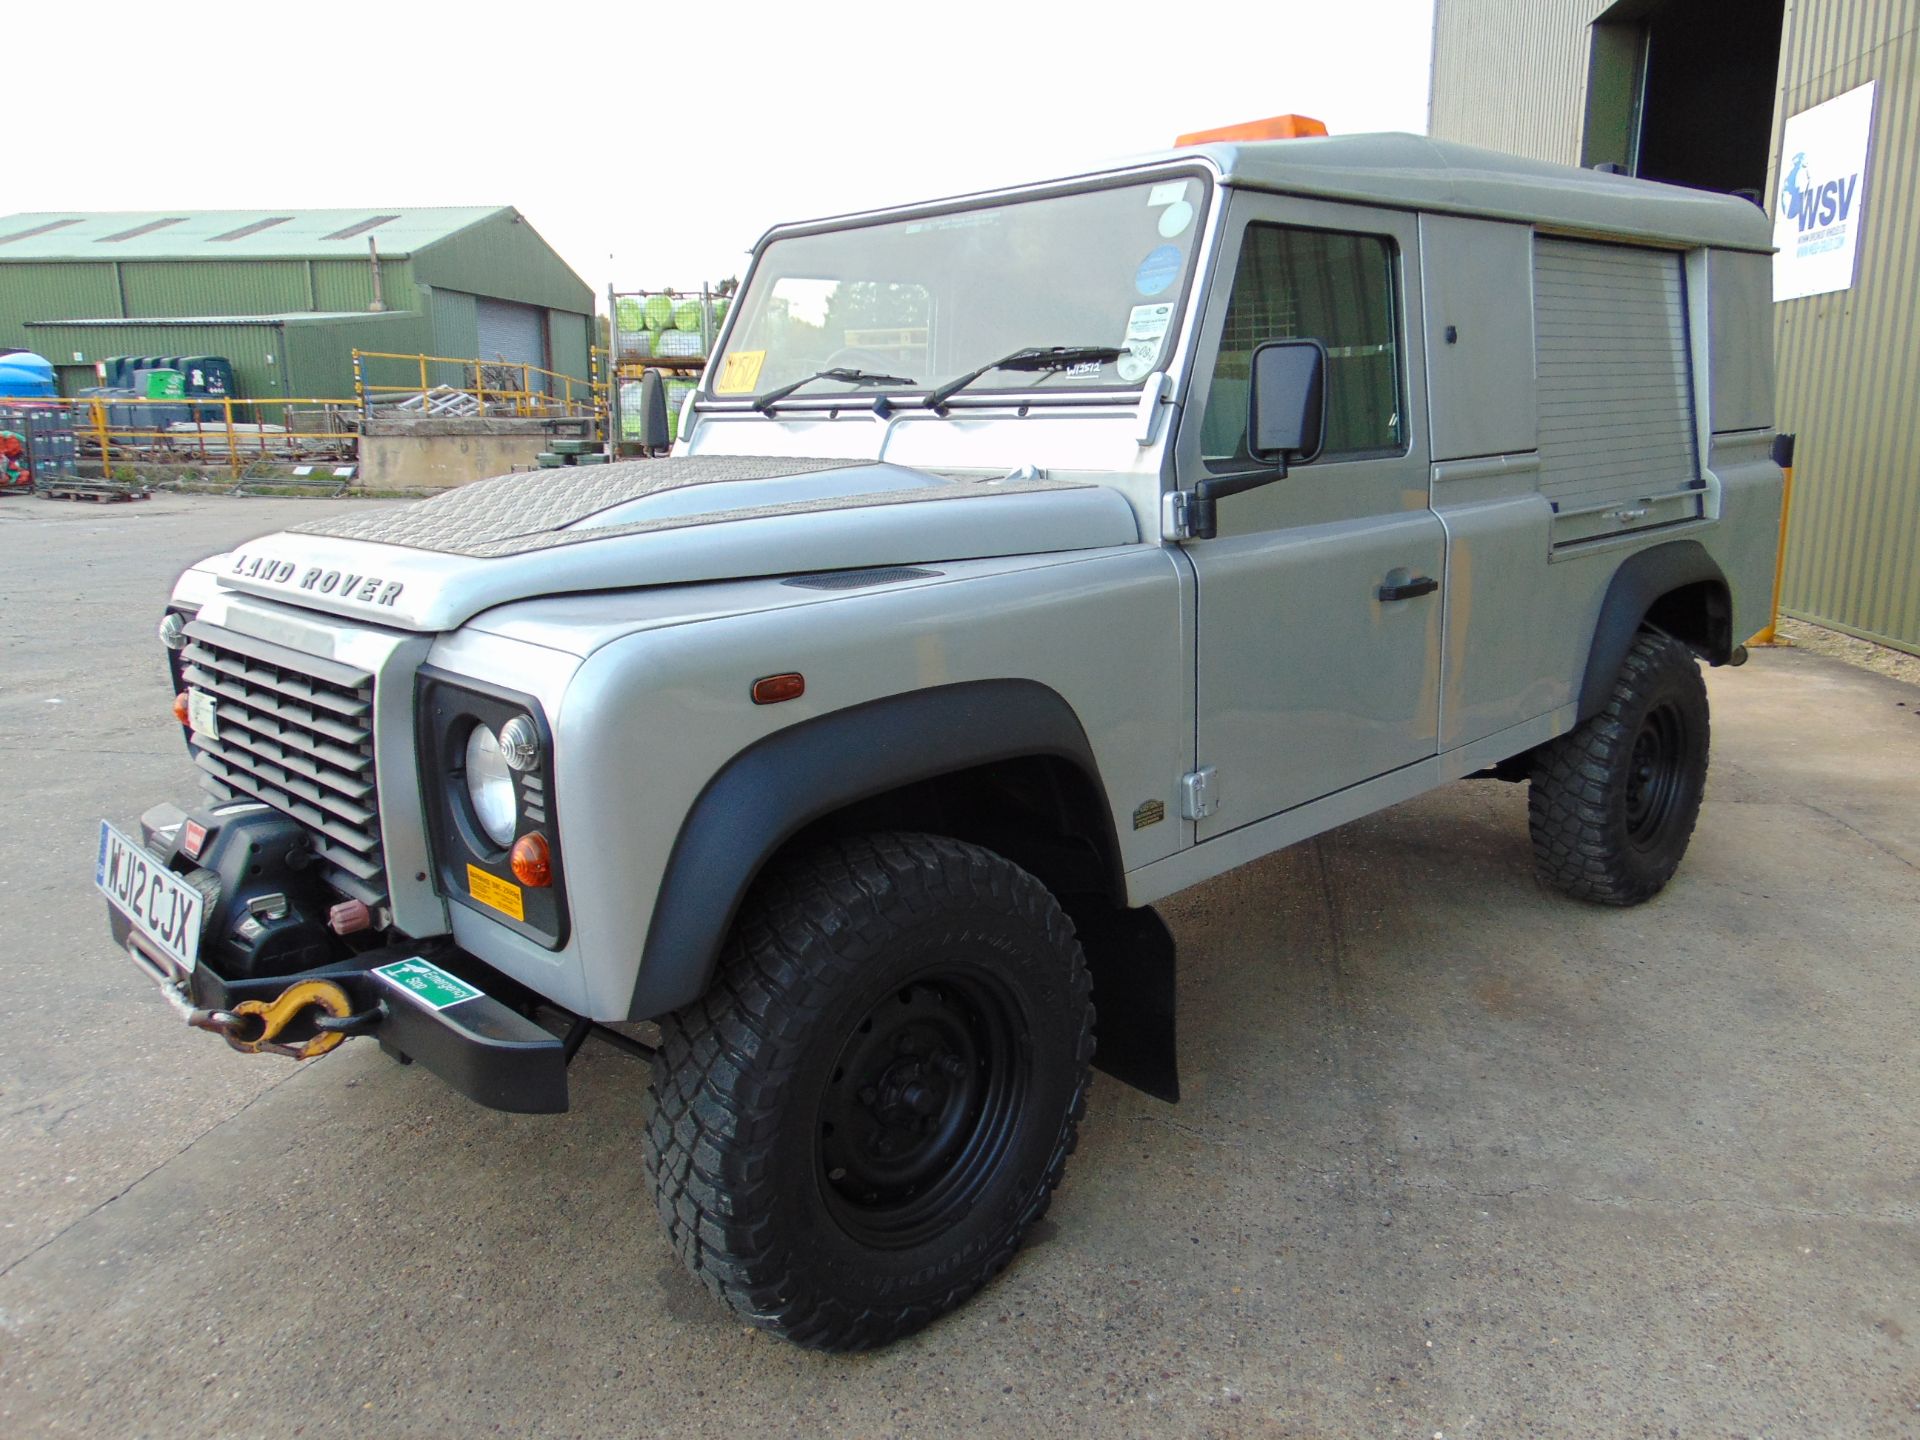 1 Owner 2013 Land Rover Defender 110 Puma hardtop 4x4 Utility vehicle ONLY 101,176 MILES! - Image 3 of 40